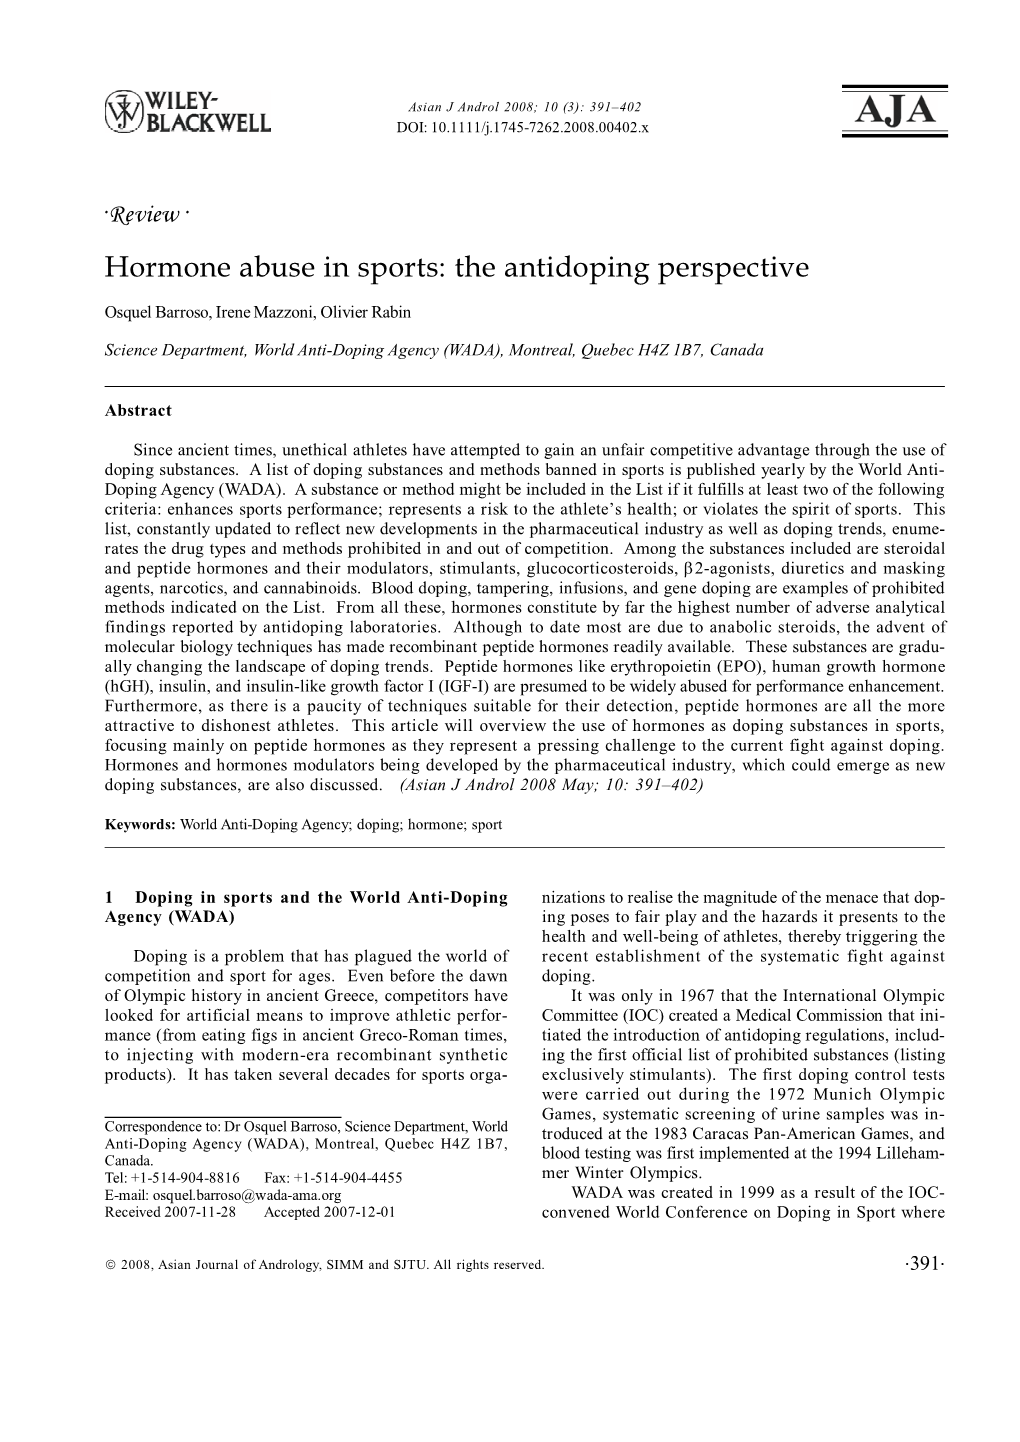 Hormone Abuse in Sports: the Antidoping Perspective